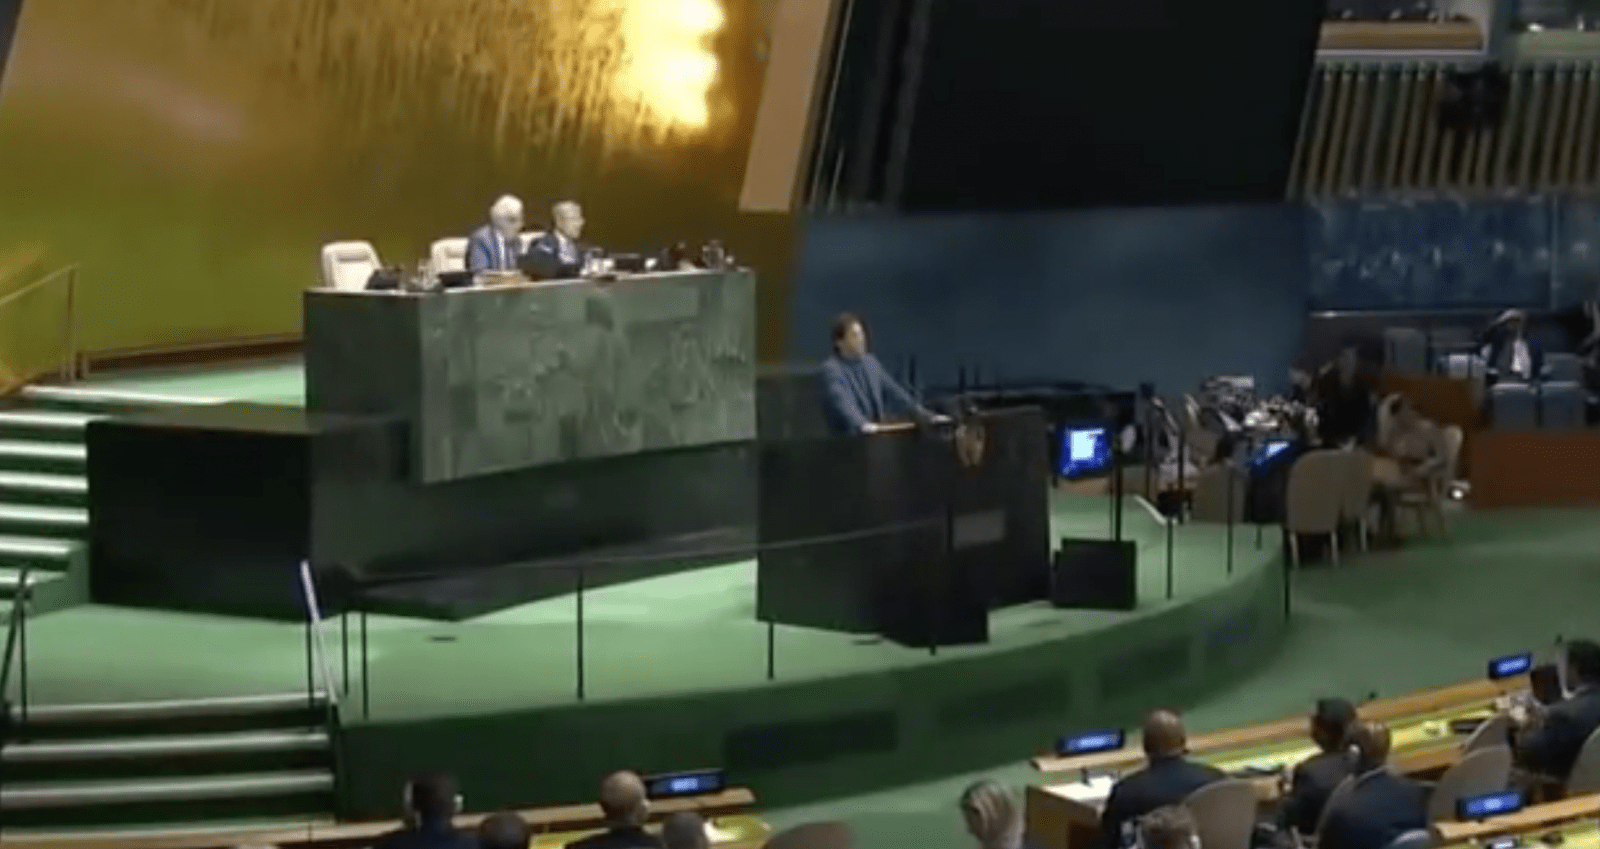 Kashmir Issue At The 74th UNGA Session And The Nuclear Discourse